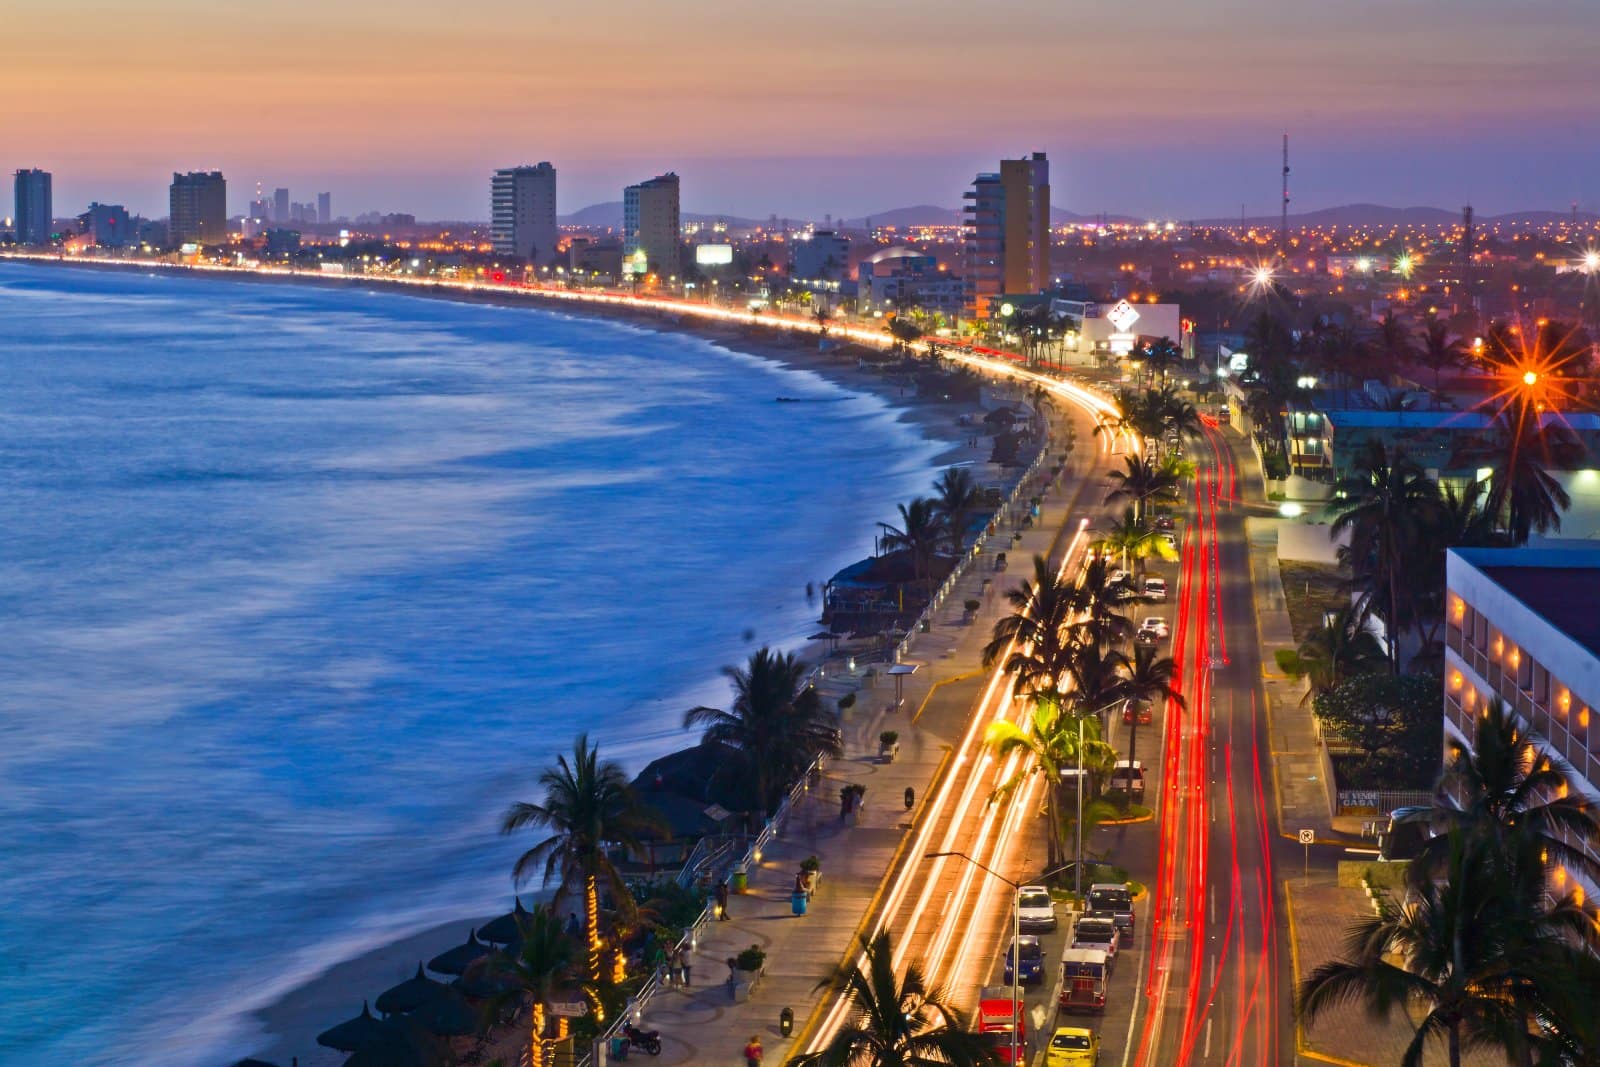 <p class="wp-caption-text">Image Credit: Shutterstock / photomatz</p>  <p><span>The Malecón, Havana’s iconic seaside boulevard, stretches for 8 kilometers along the coast, offering breathtaking views of the Gulf of Mexico. It’s a popular spot for locals and tourists, serving as a social hub where people gather to fish, play music, and watch the sunset. The Malecón is also famous for its architectural diversity, featuring buildings from various eras, from Art Deco to Neo-Moorish.</span></p>